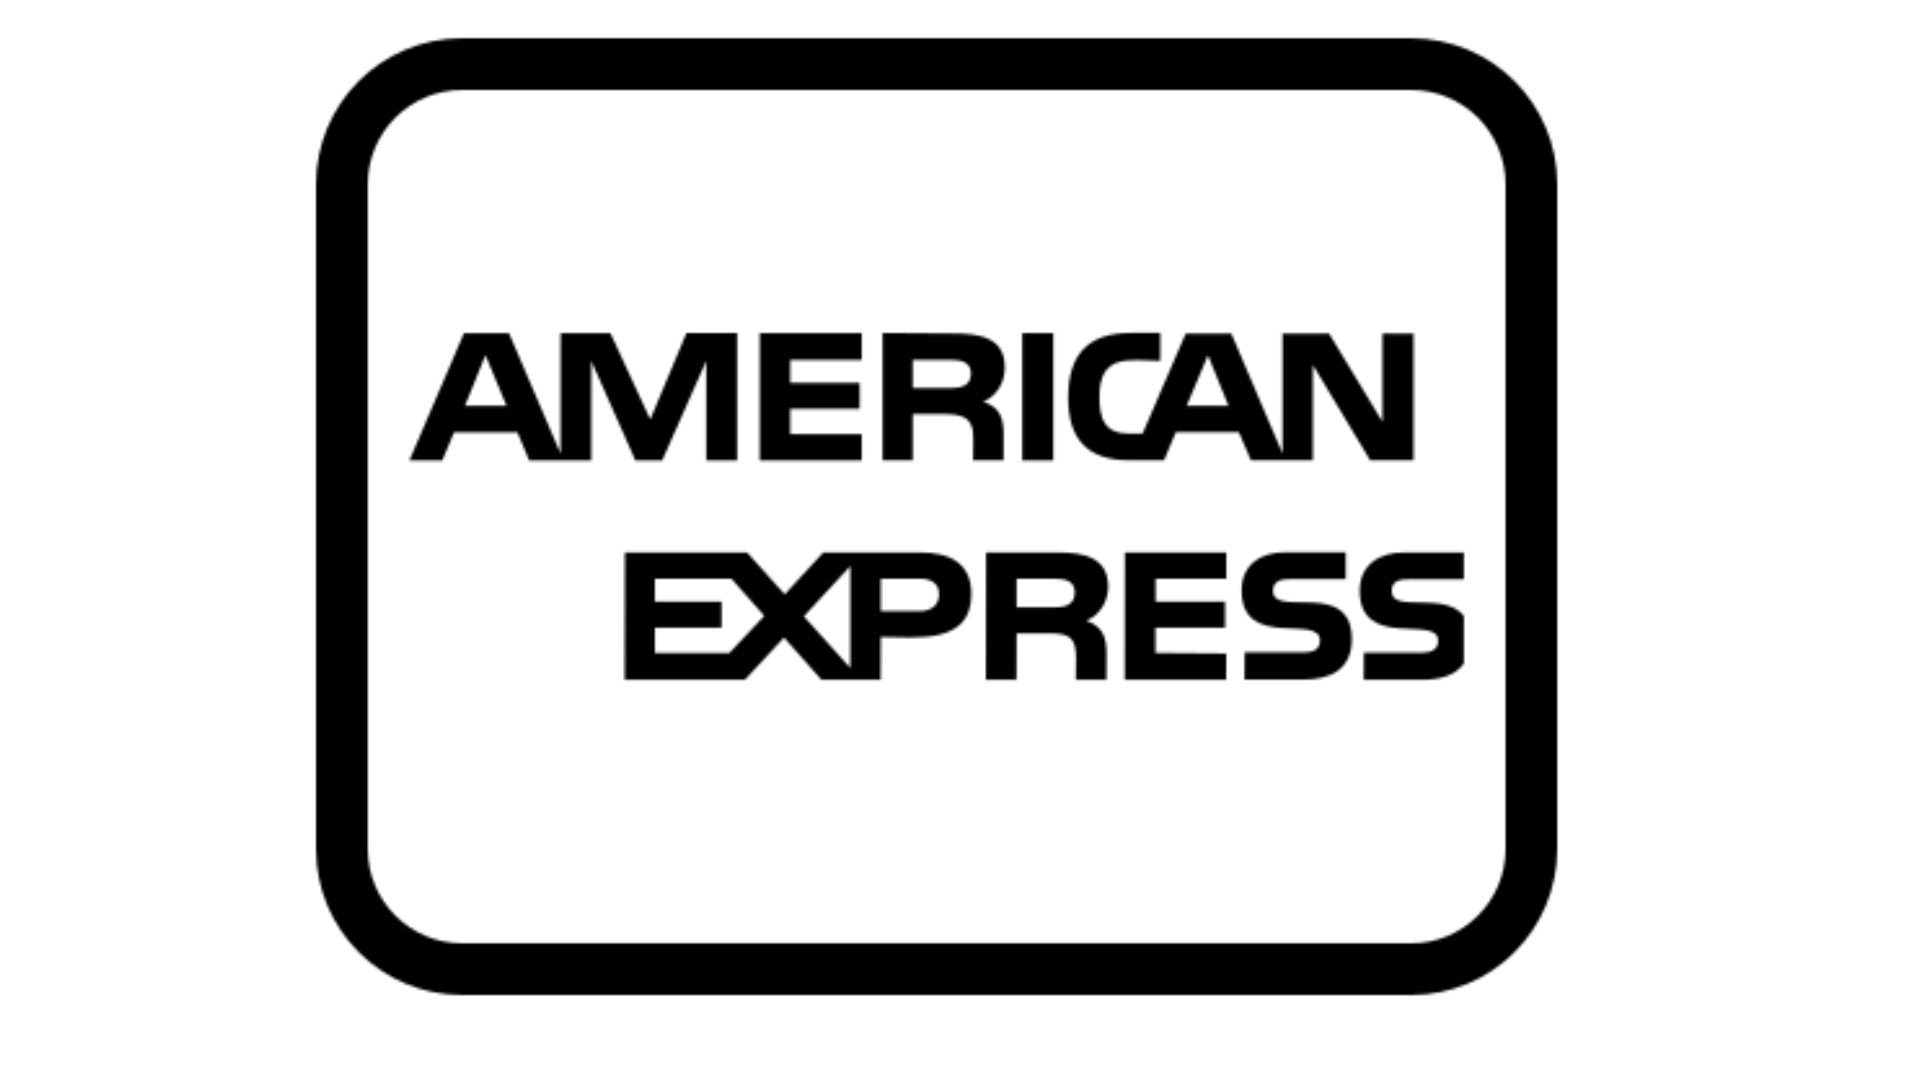 American Express Black Card has become a cultural icon